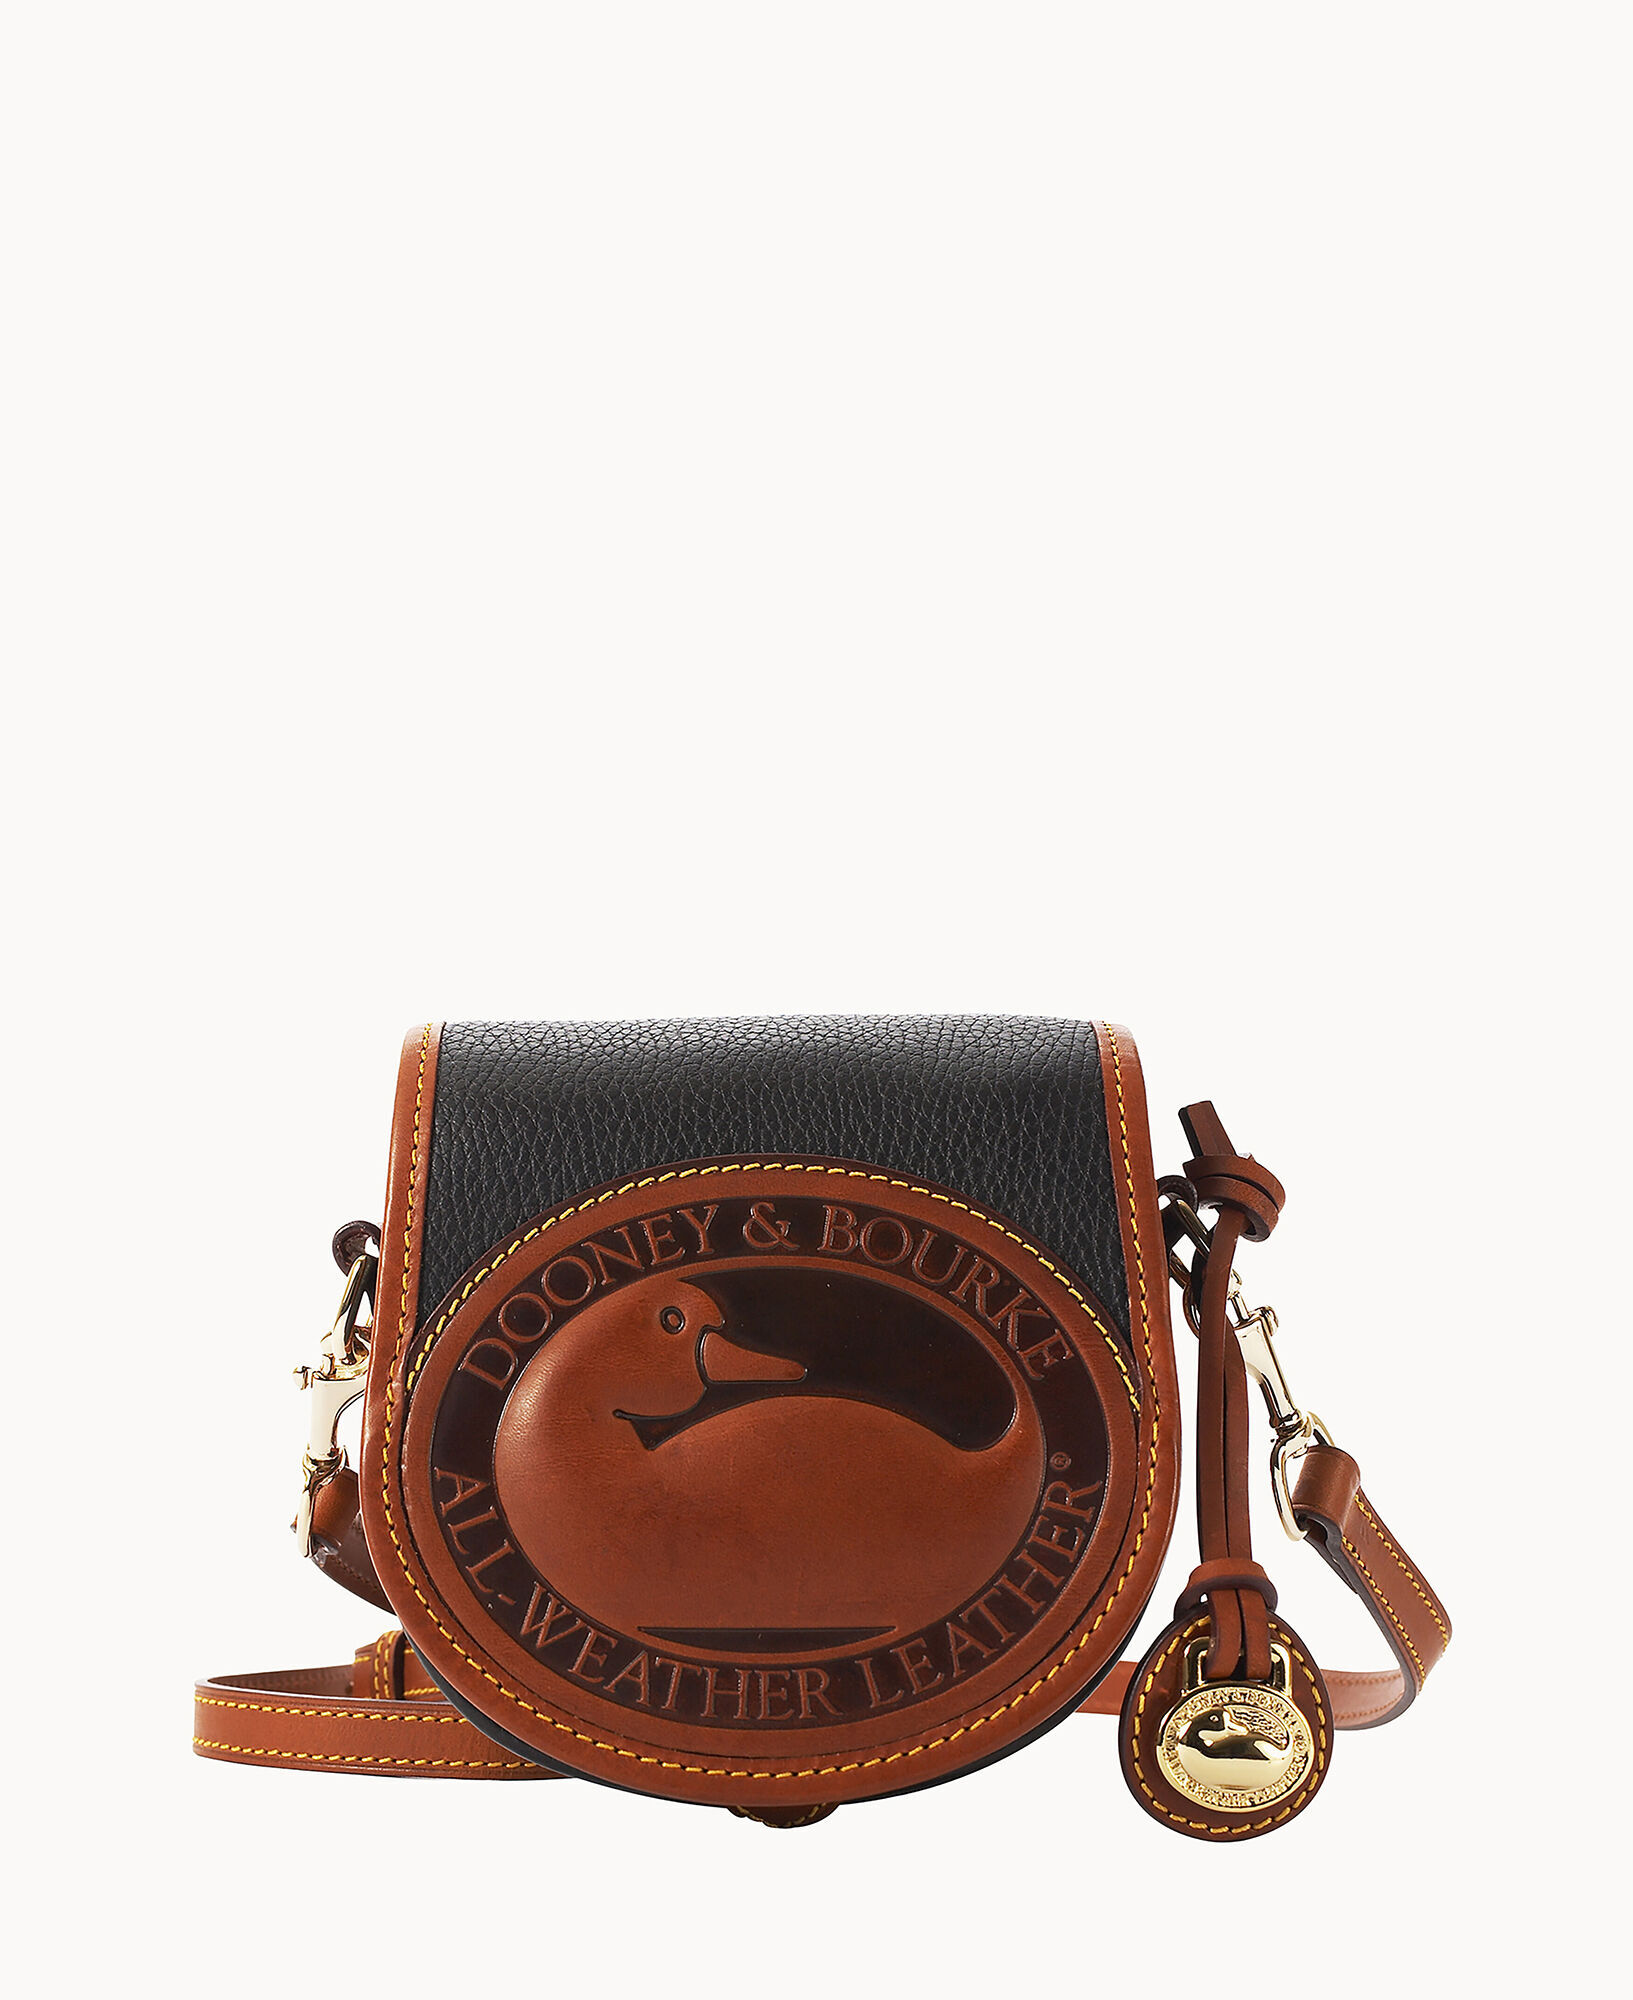 Leather Iside continental purse with chain